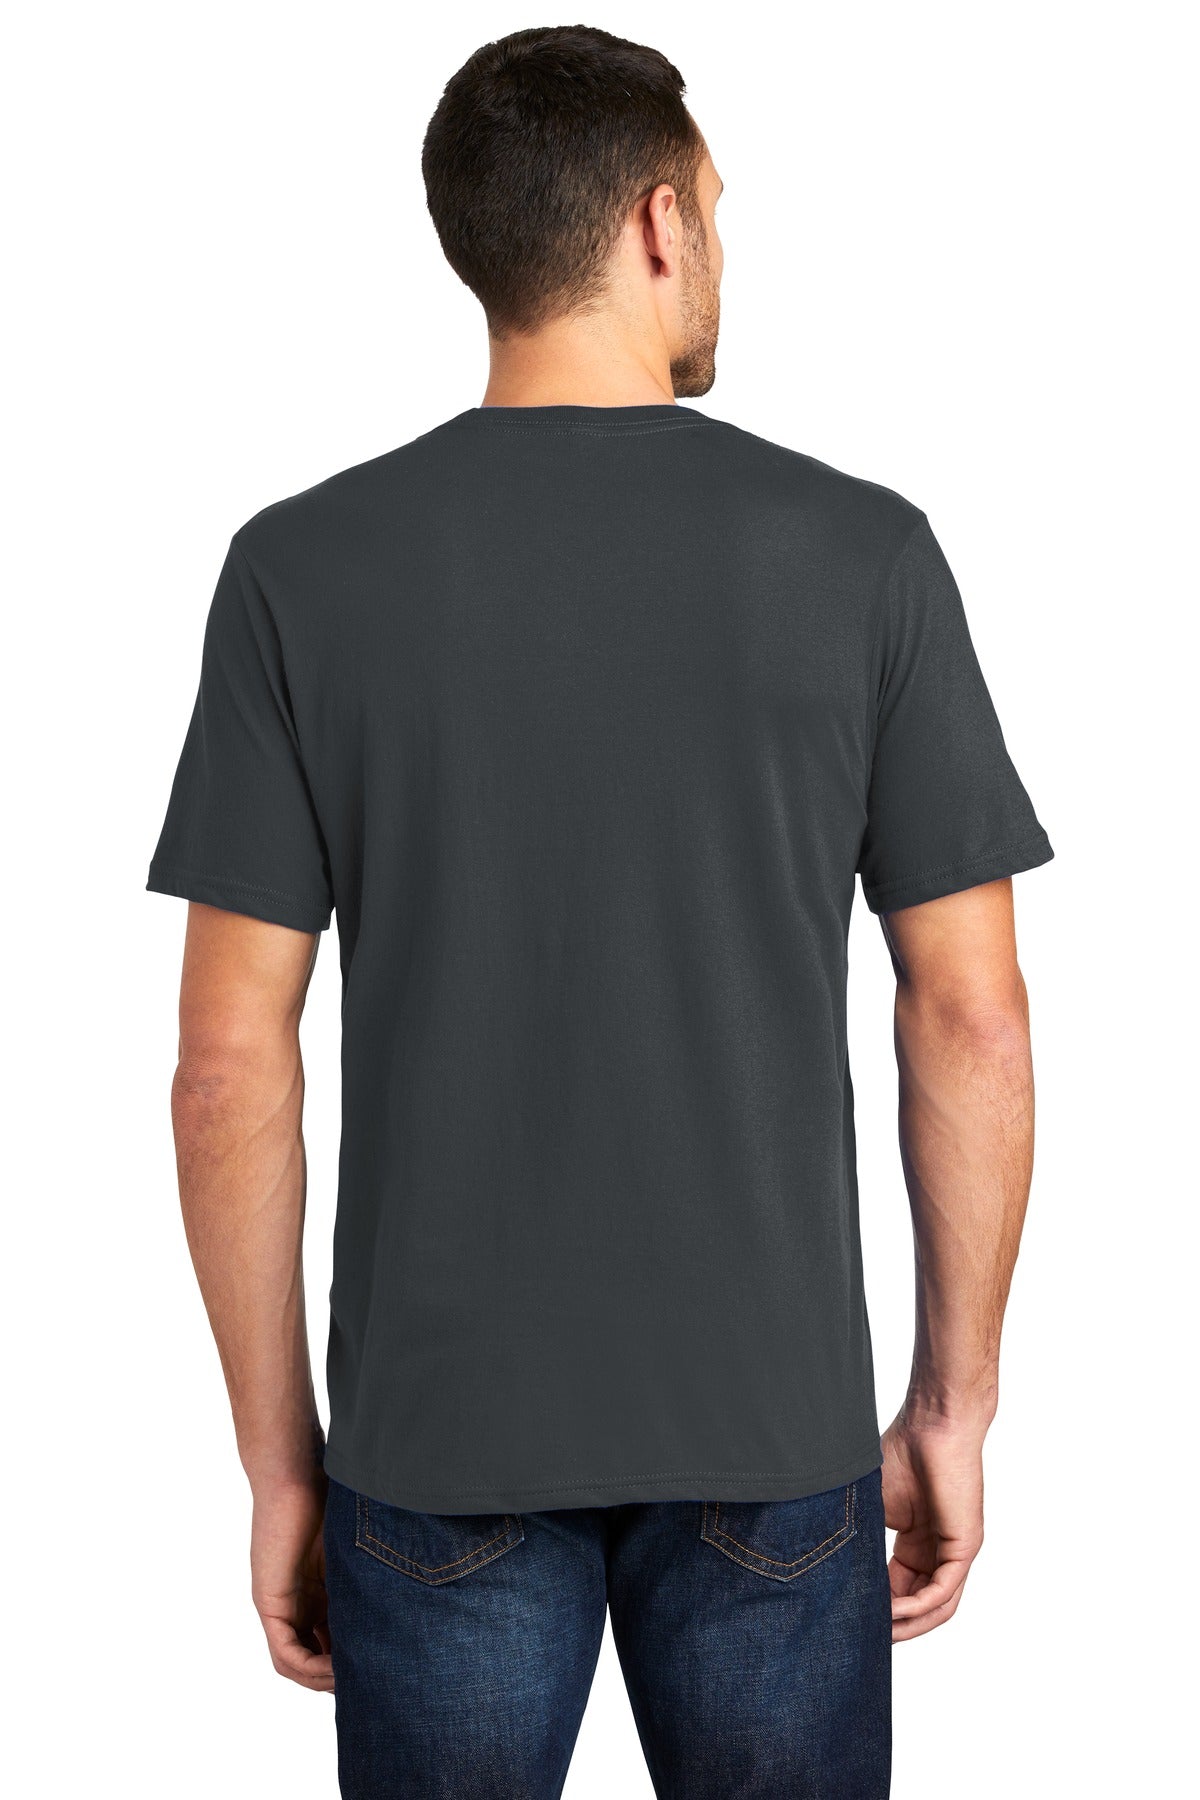 District® Very Important Tee®. DT6000 [Charcoal] - DFW Impression